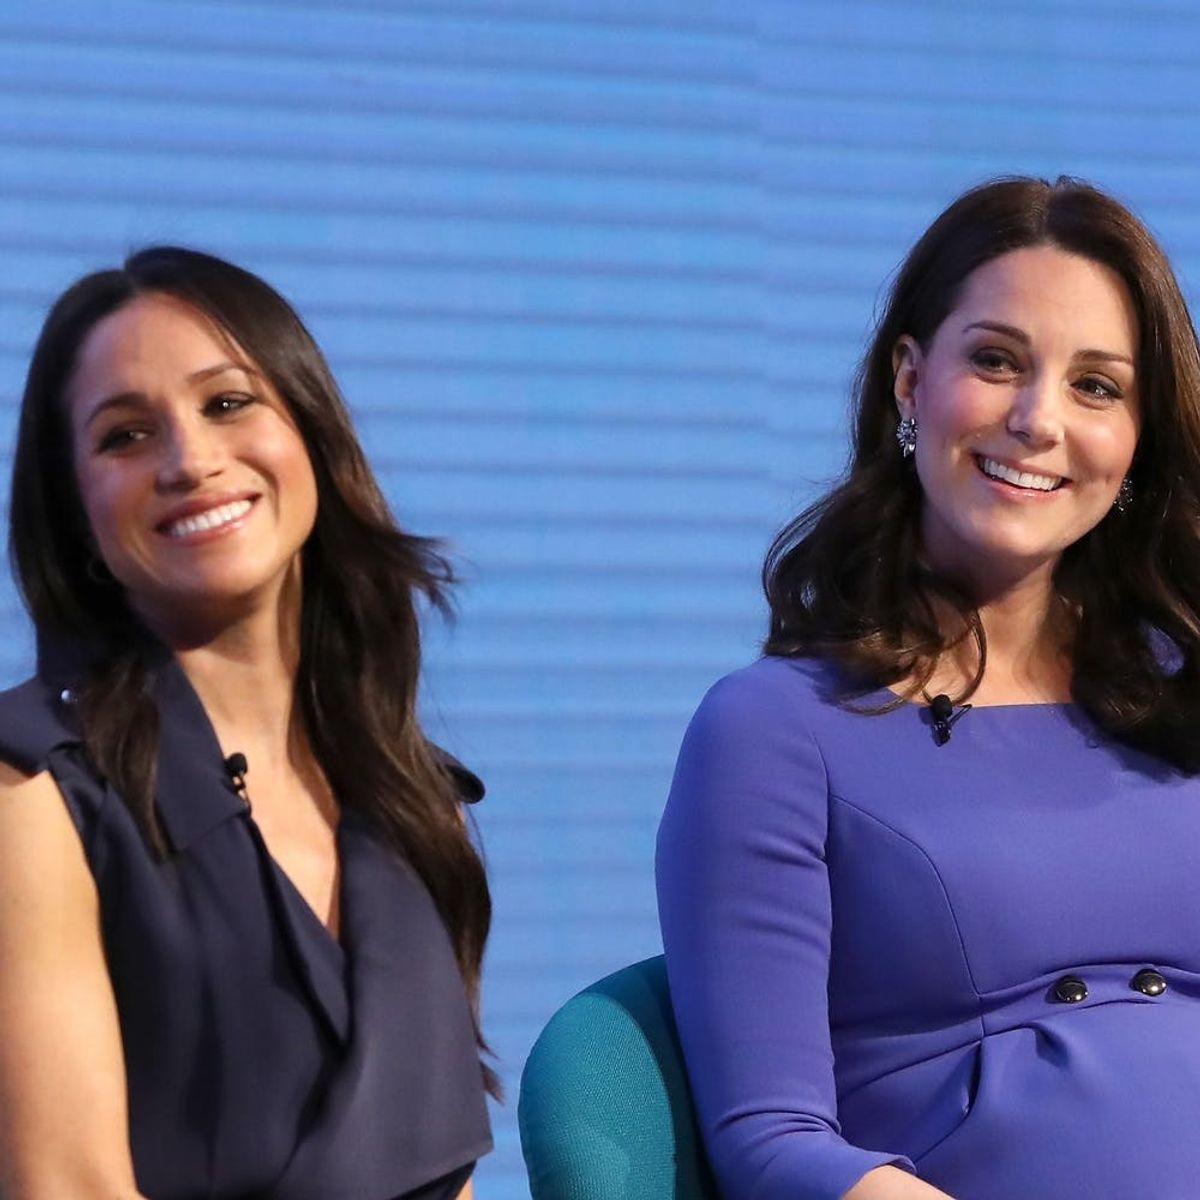 Meghan Markle and Kate Middleton Twinned in Royal Shades of Blue for Their First Joint Event